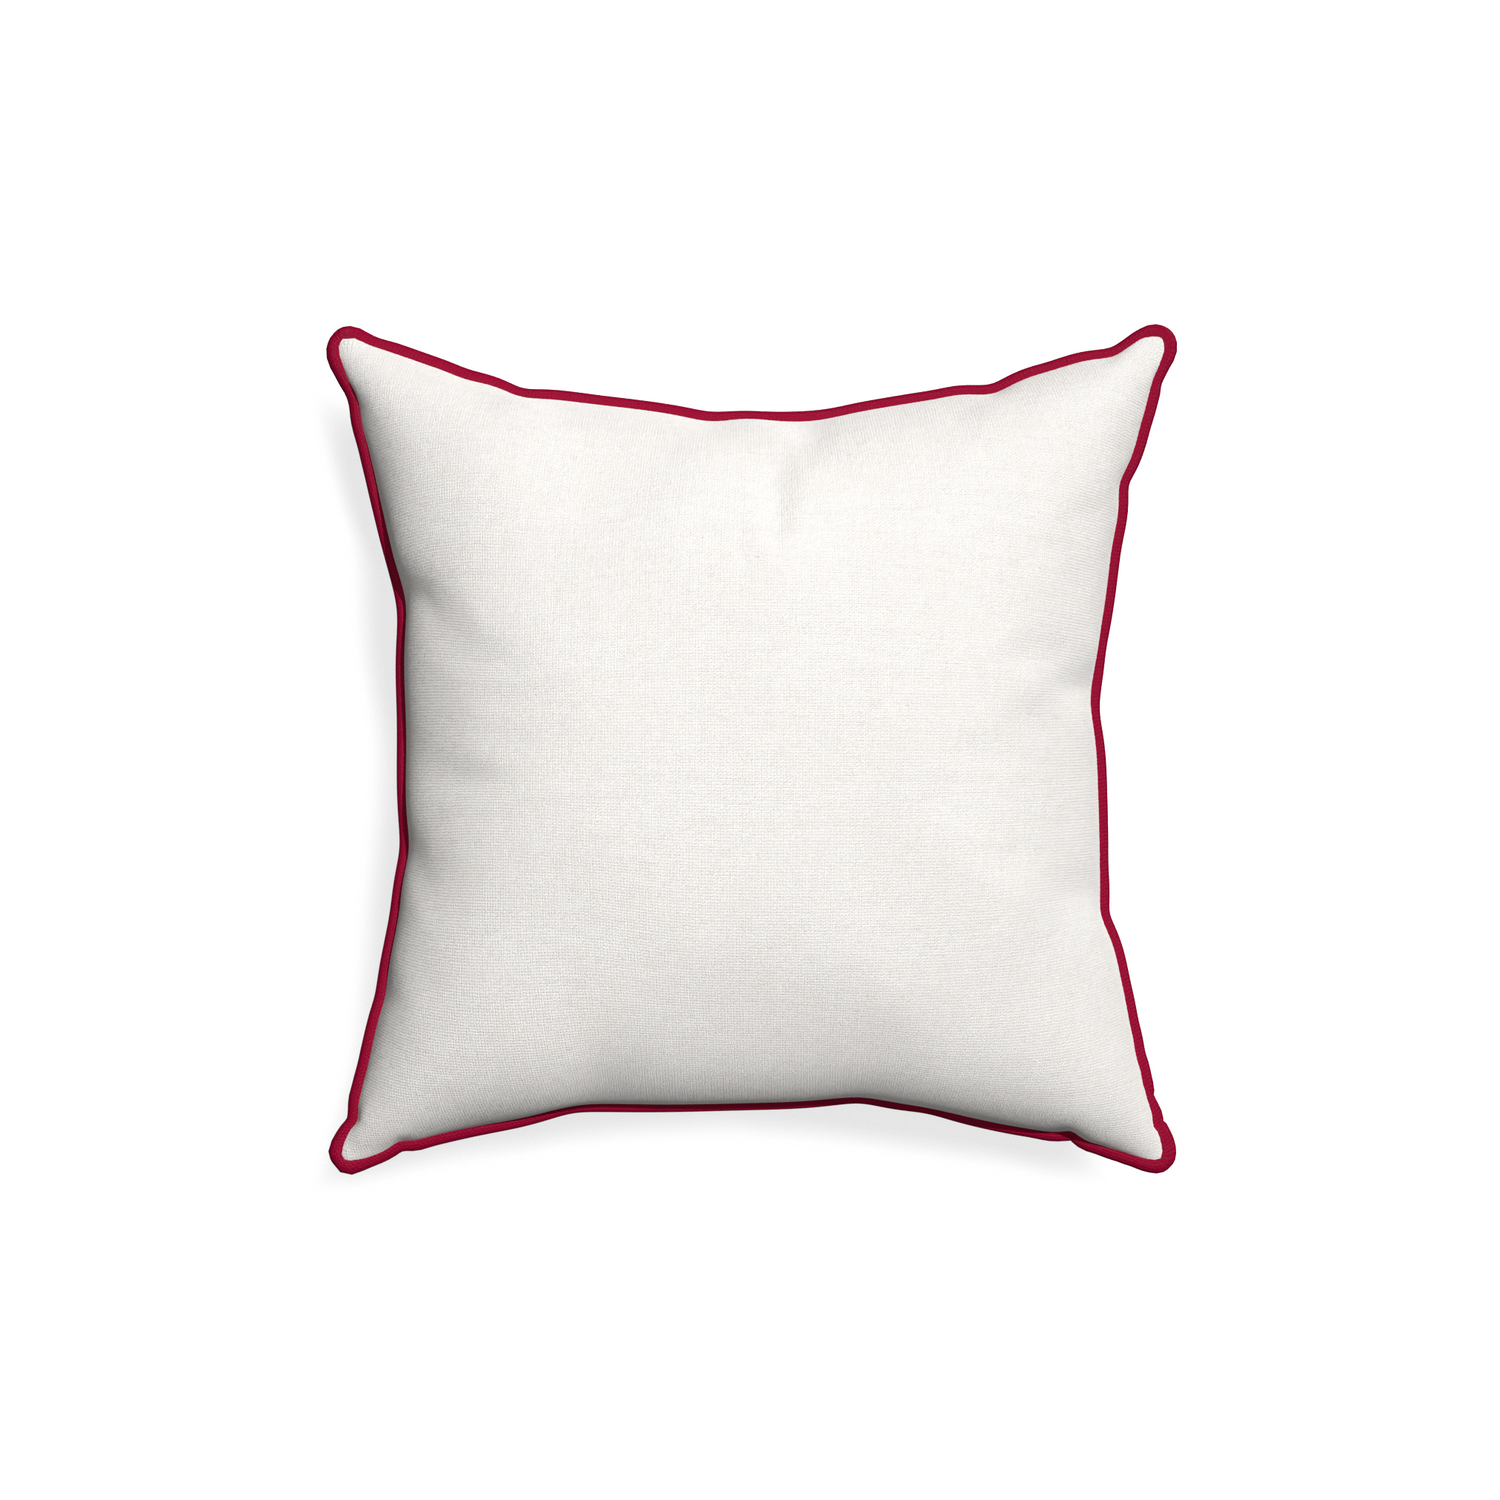 18-square flour custom pillow with raspberry piping on white background